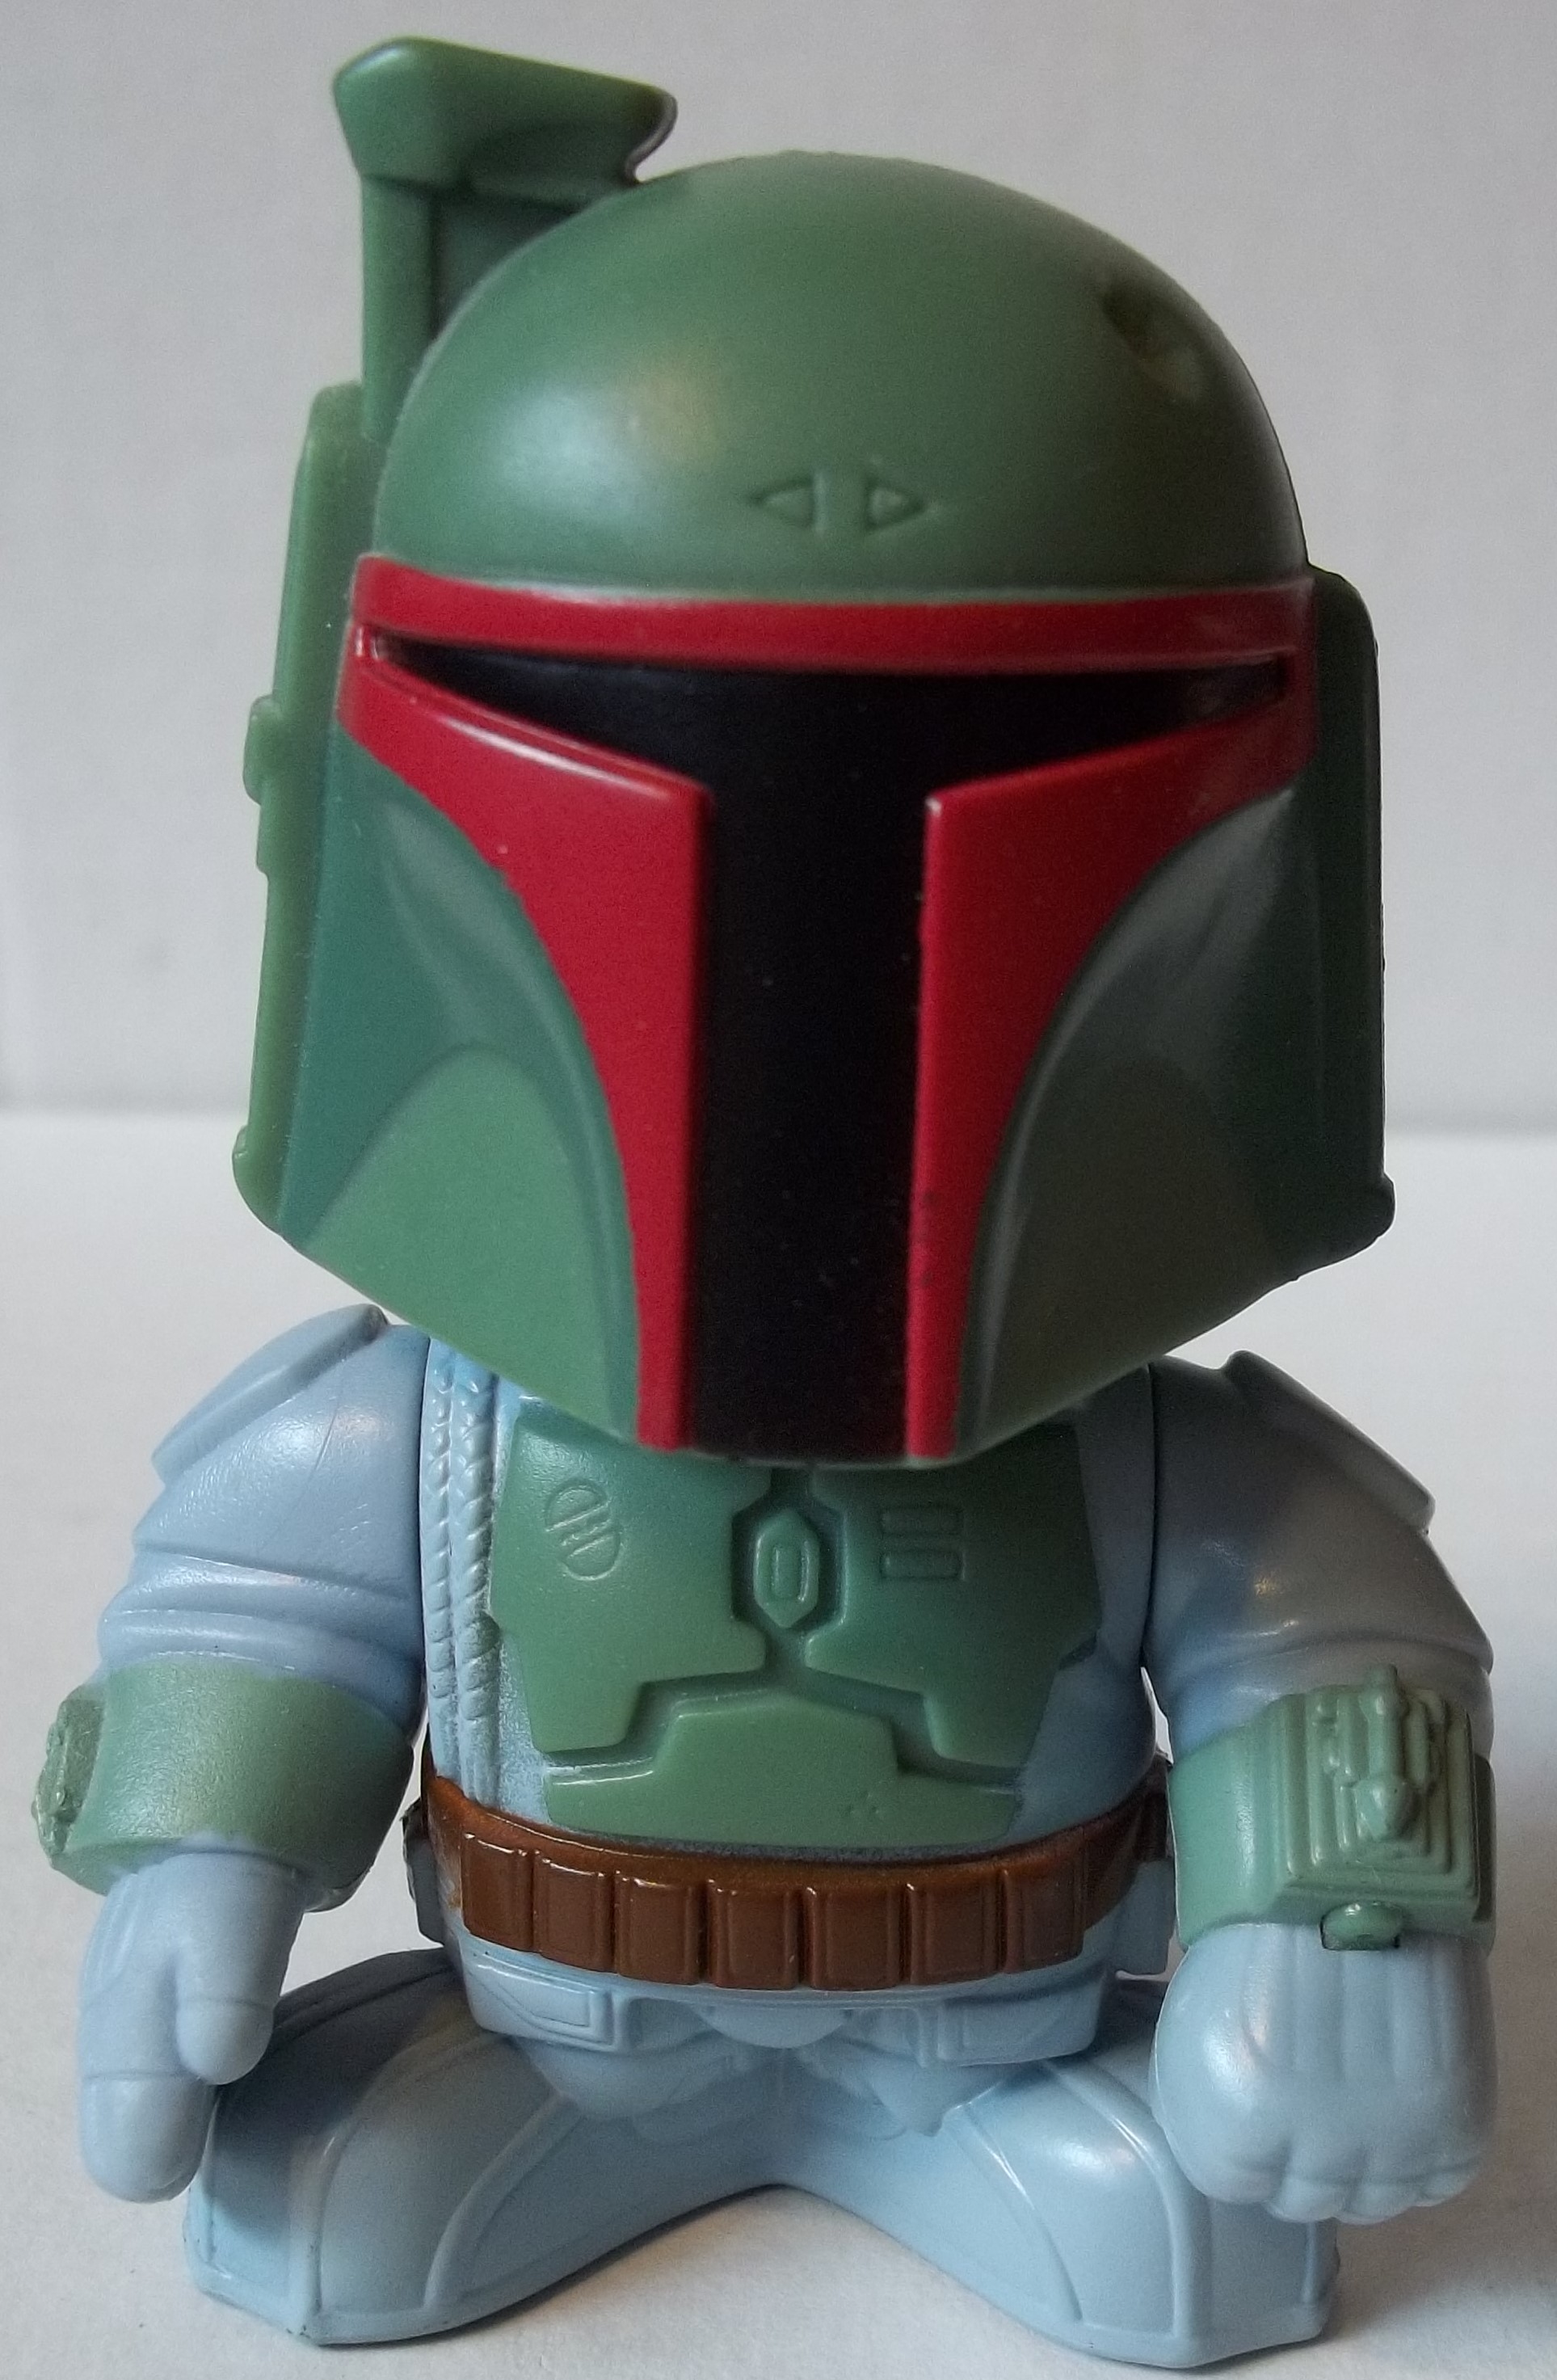 2005 Burger King Star Wars Super-D Boba Fett Toy In Package Condition is New. 